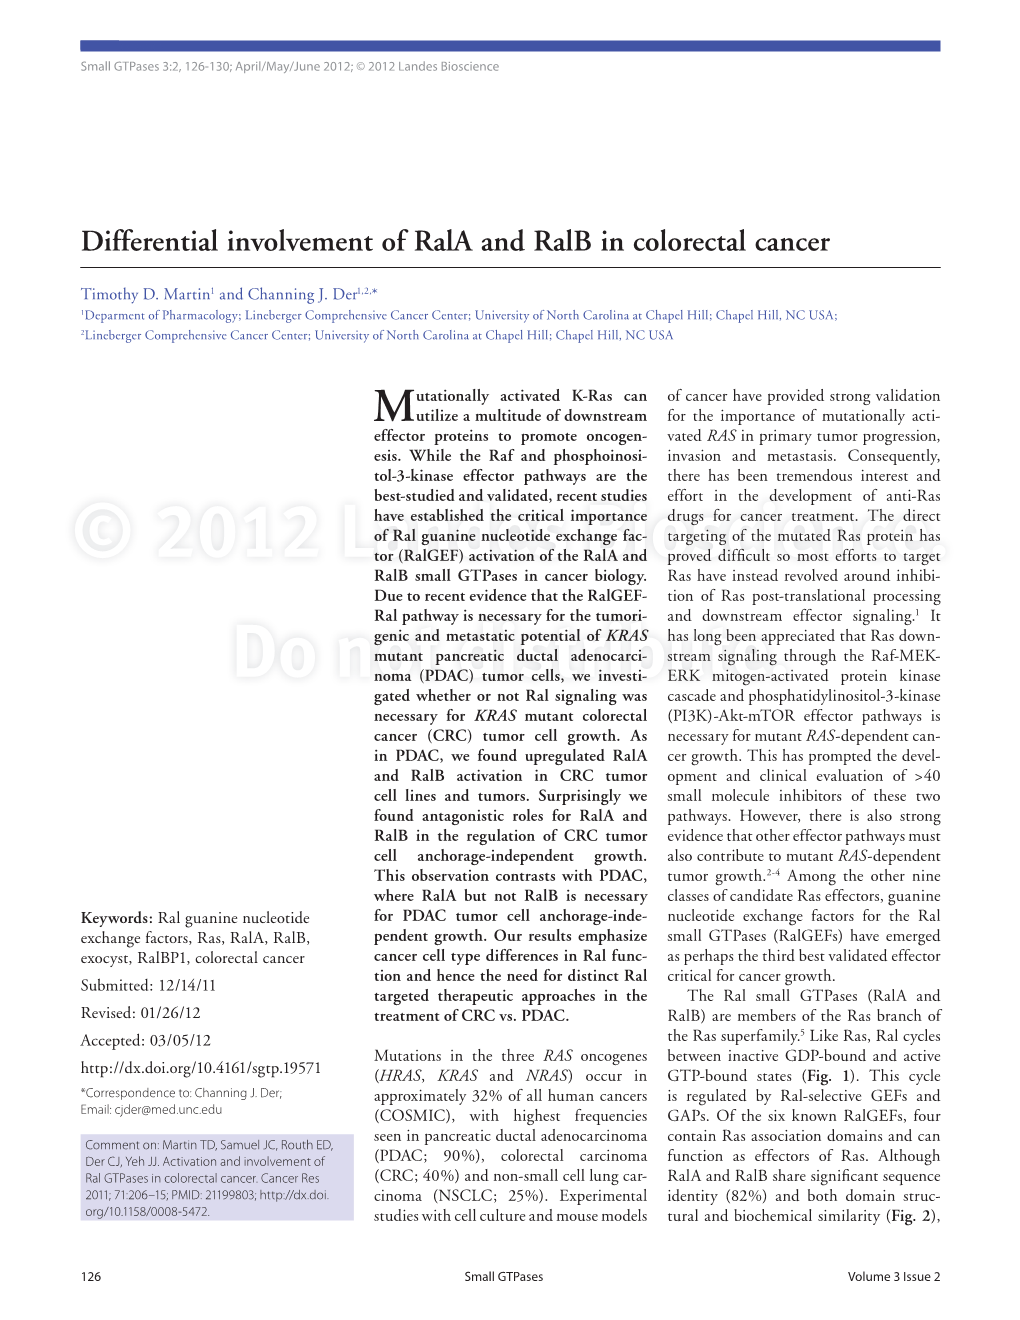 Differential Involvement of Rala and Ralb in Colorectal Cancer